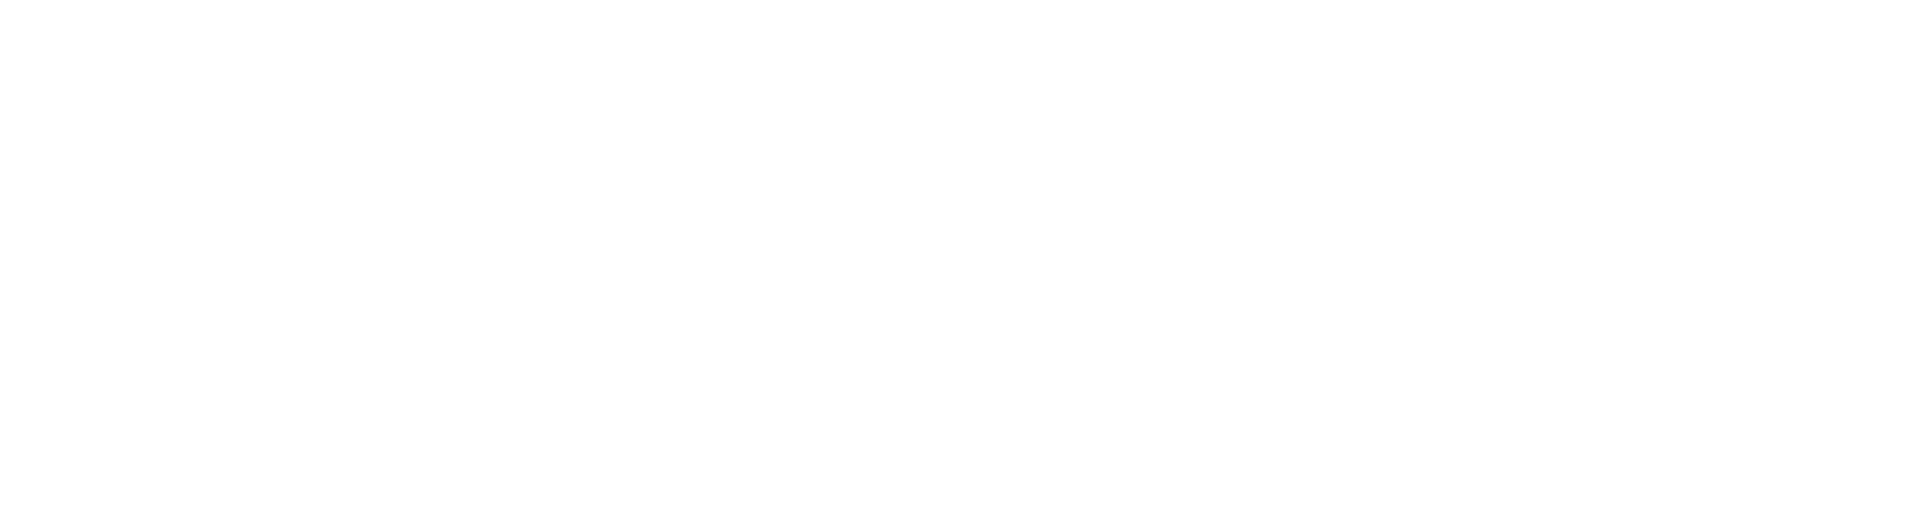 Horan & McConaty Funeral Service and Cremation Logo